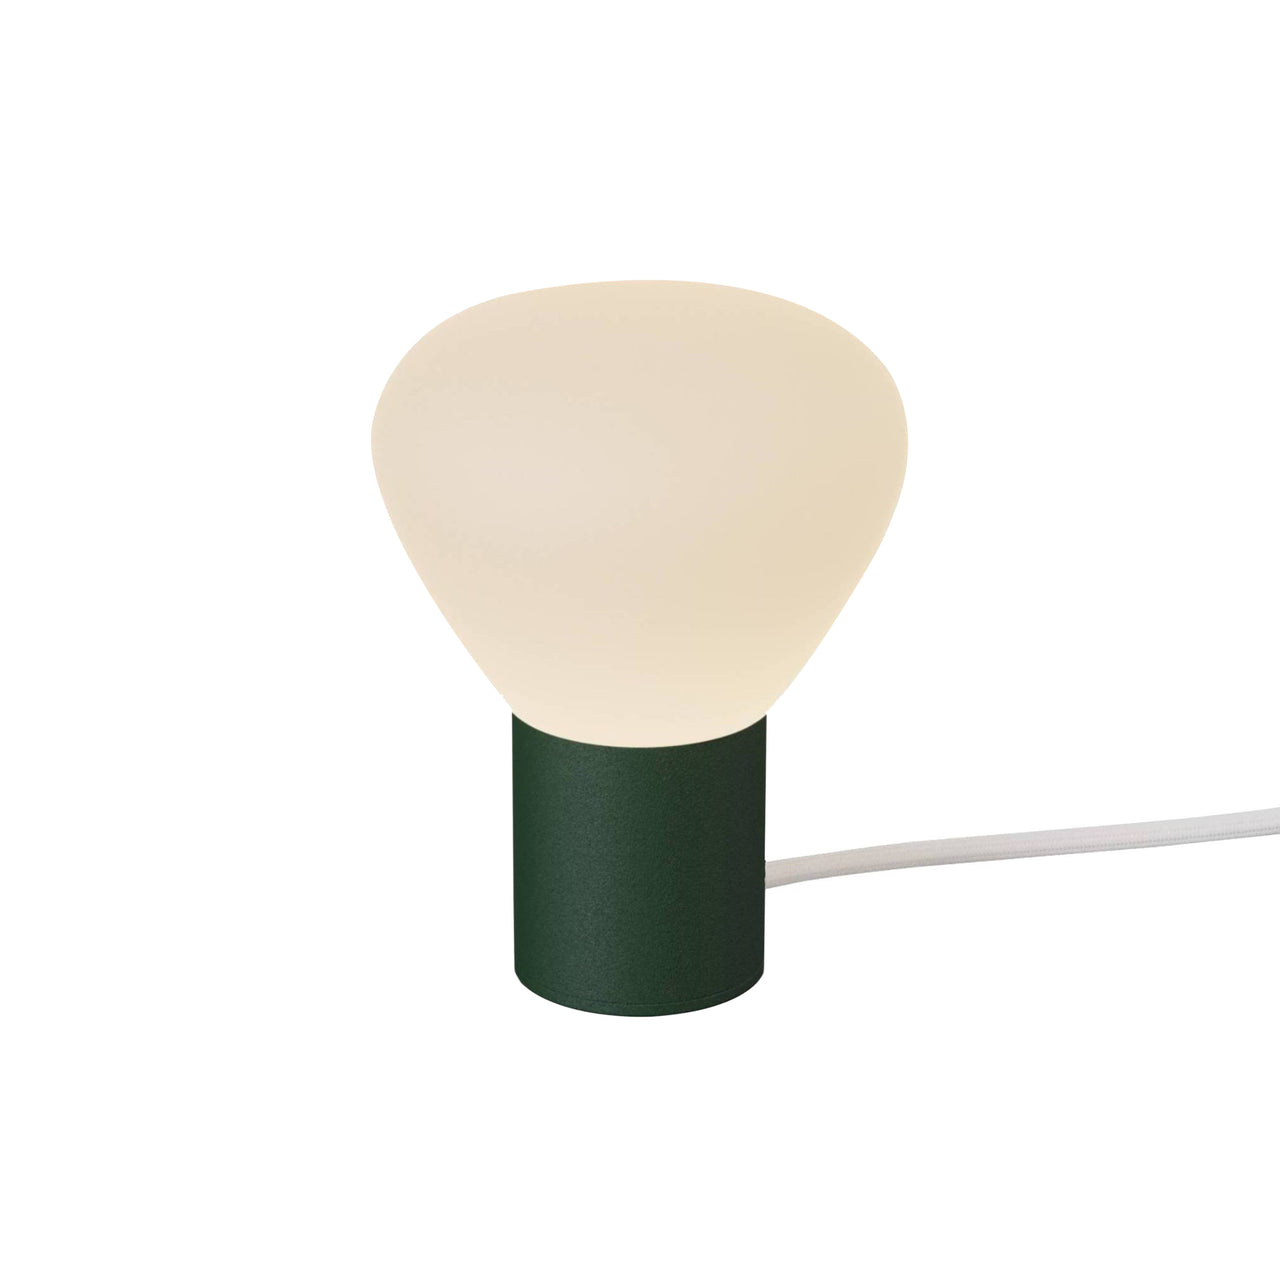 Parc 01 Table Lamp: Handswitch + Green + White